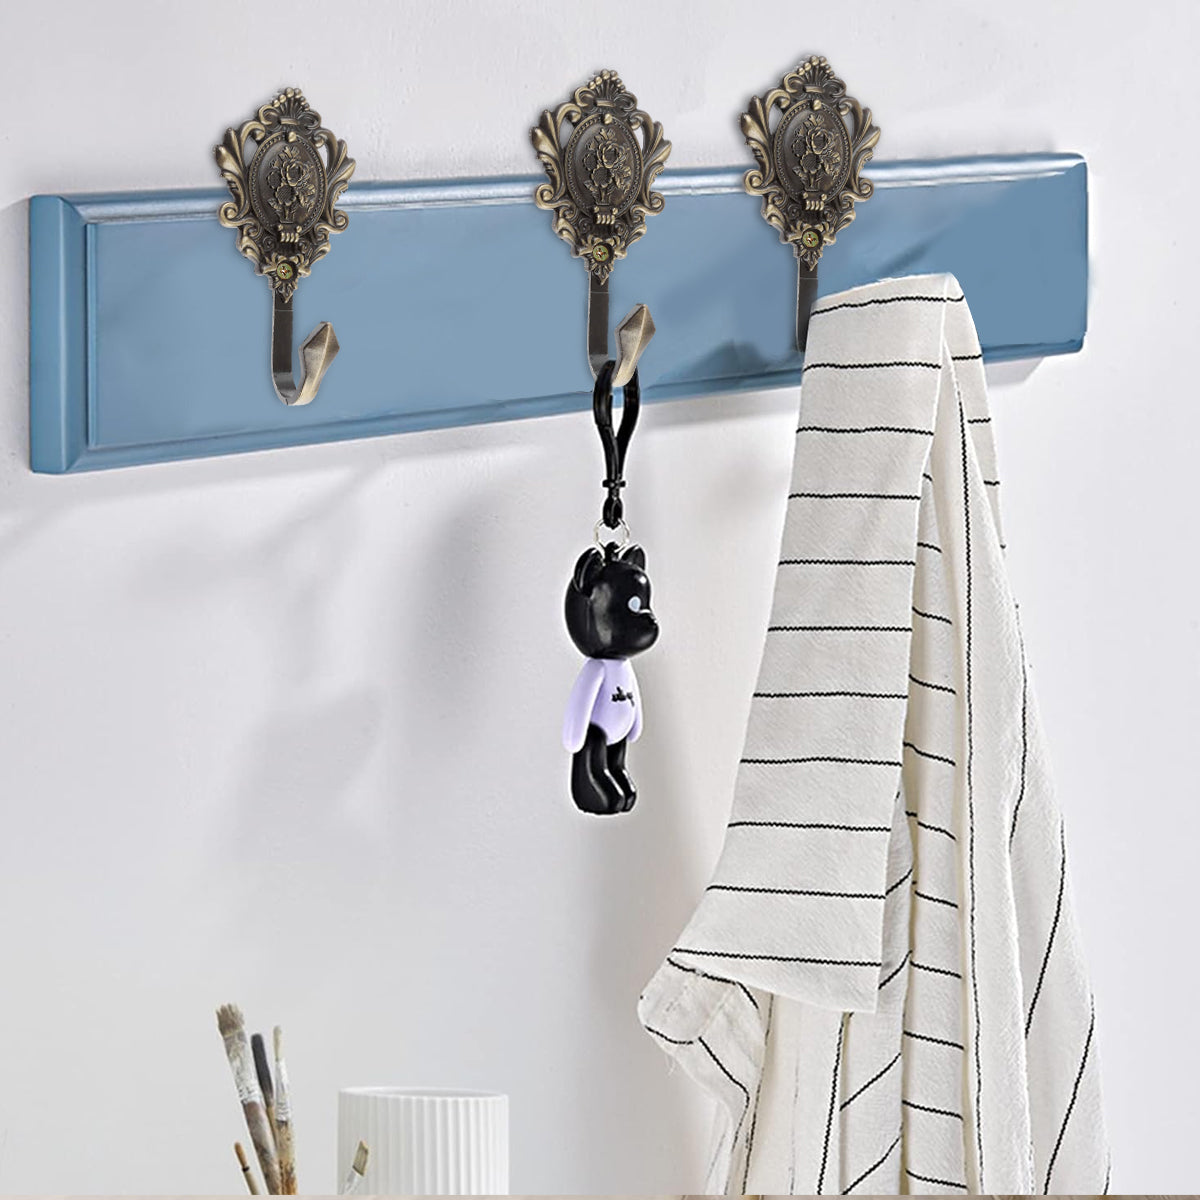 HASTHIP® 2Pcs Vintage Zinc Alloy Wall Hooks, Decorative Carved Design, Multipurpose Hooks, Used to Hang Clothes, Bags, Coats, Curtain Hold Backs and Keys (Antique Cyan)